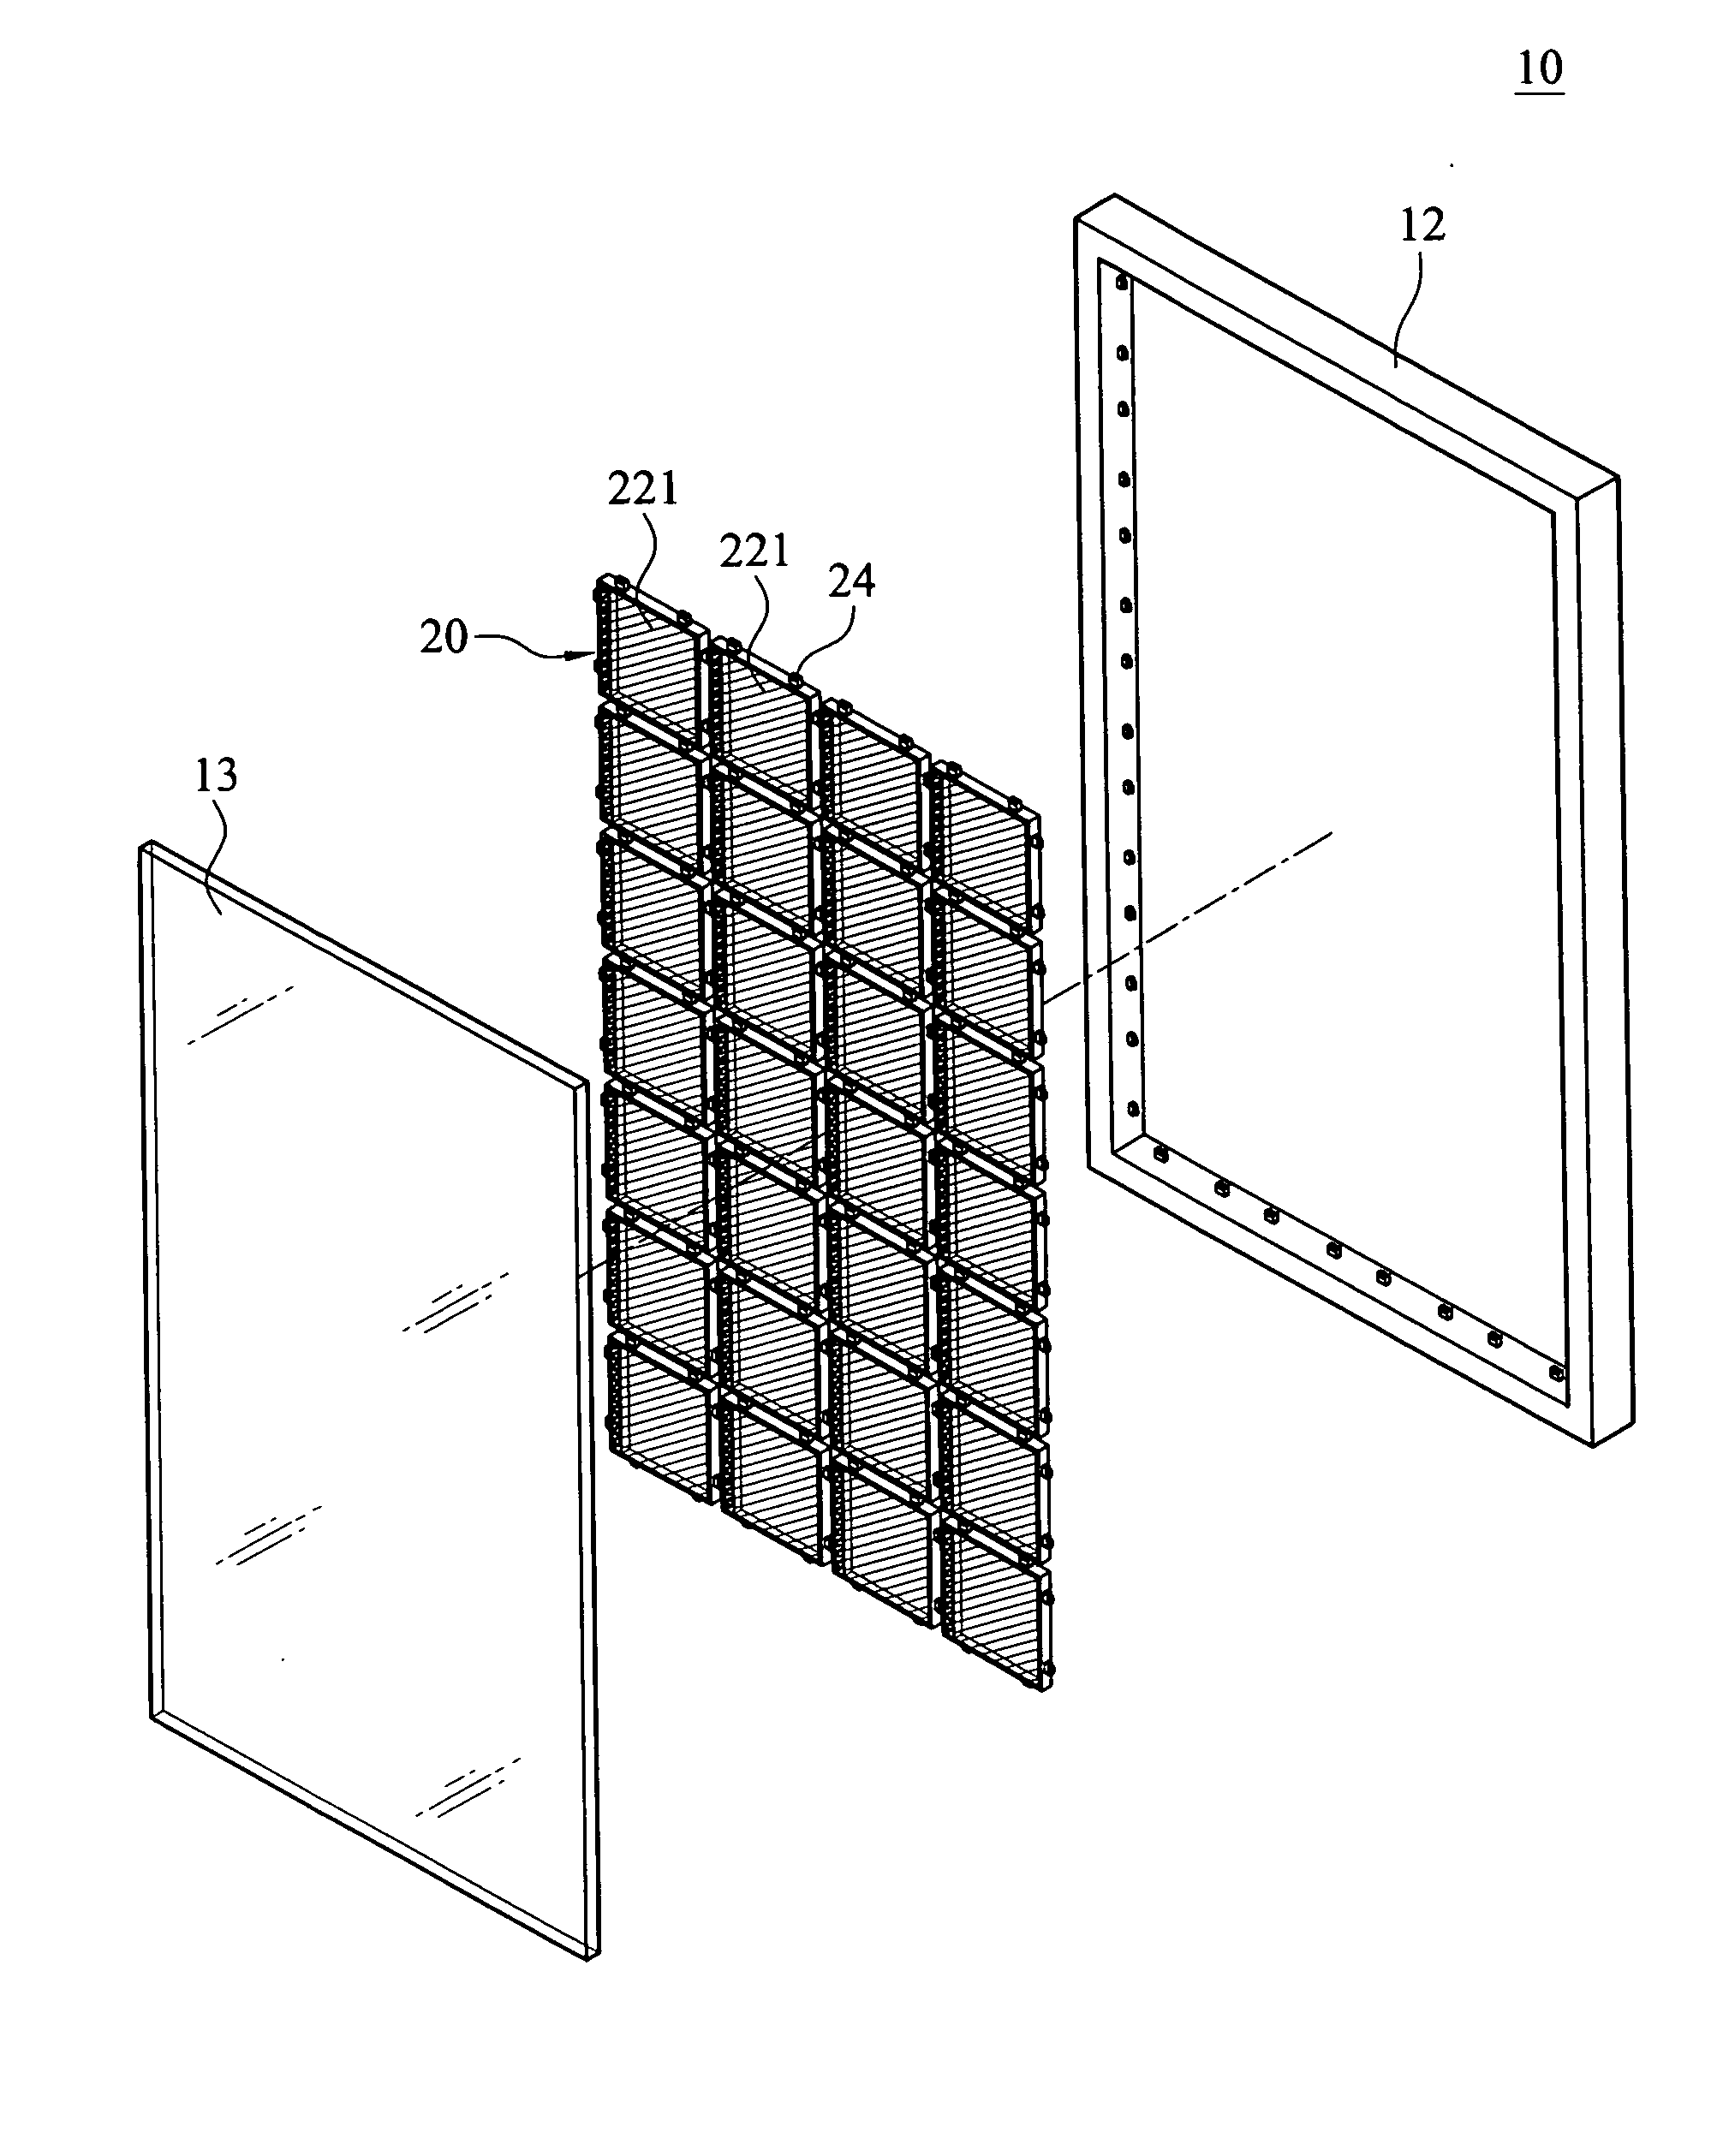 Structure of advertising box having modular lighting device and structure of same modular lighting device